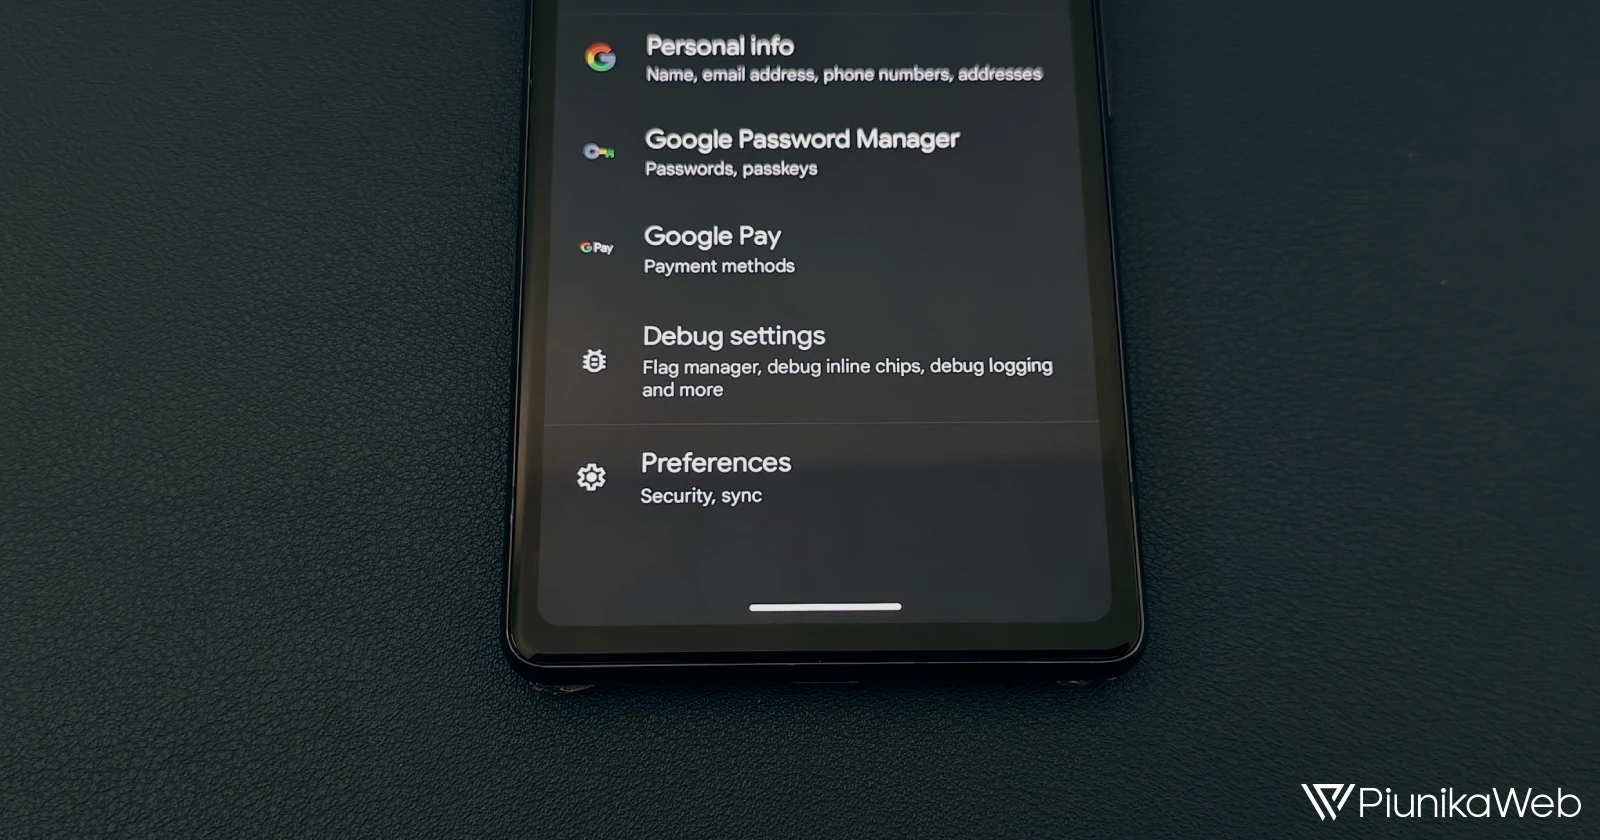 Google Password Manager to make password sharing easier on Android